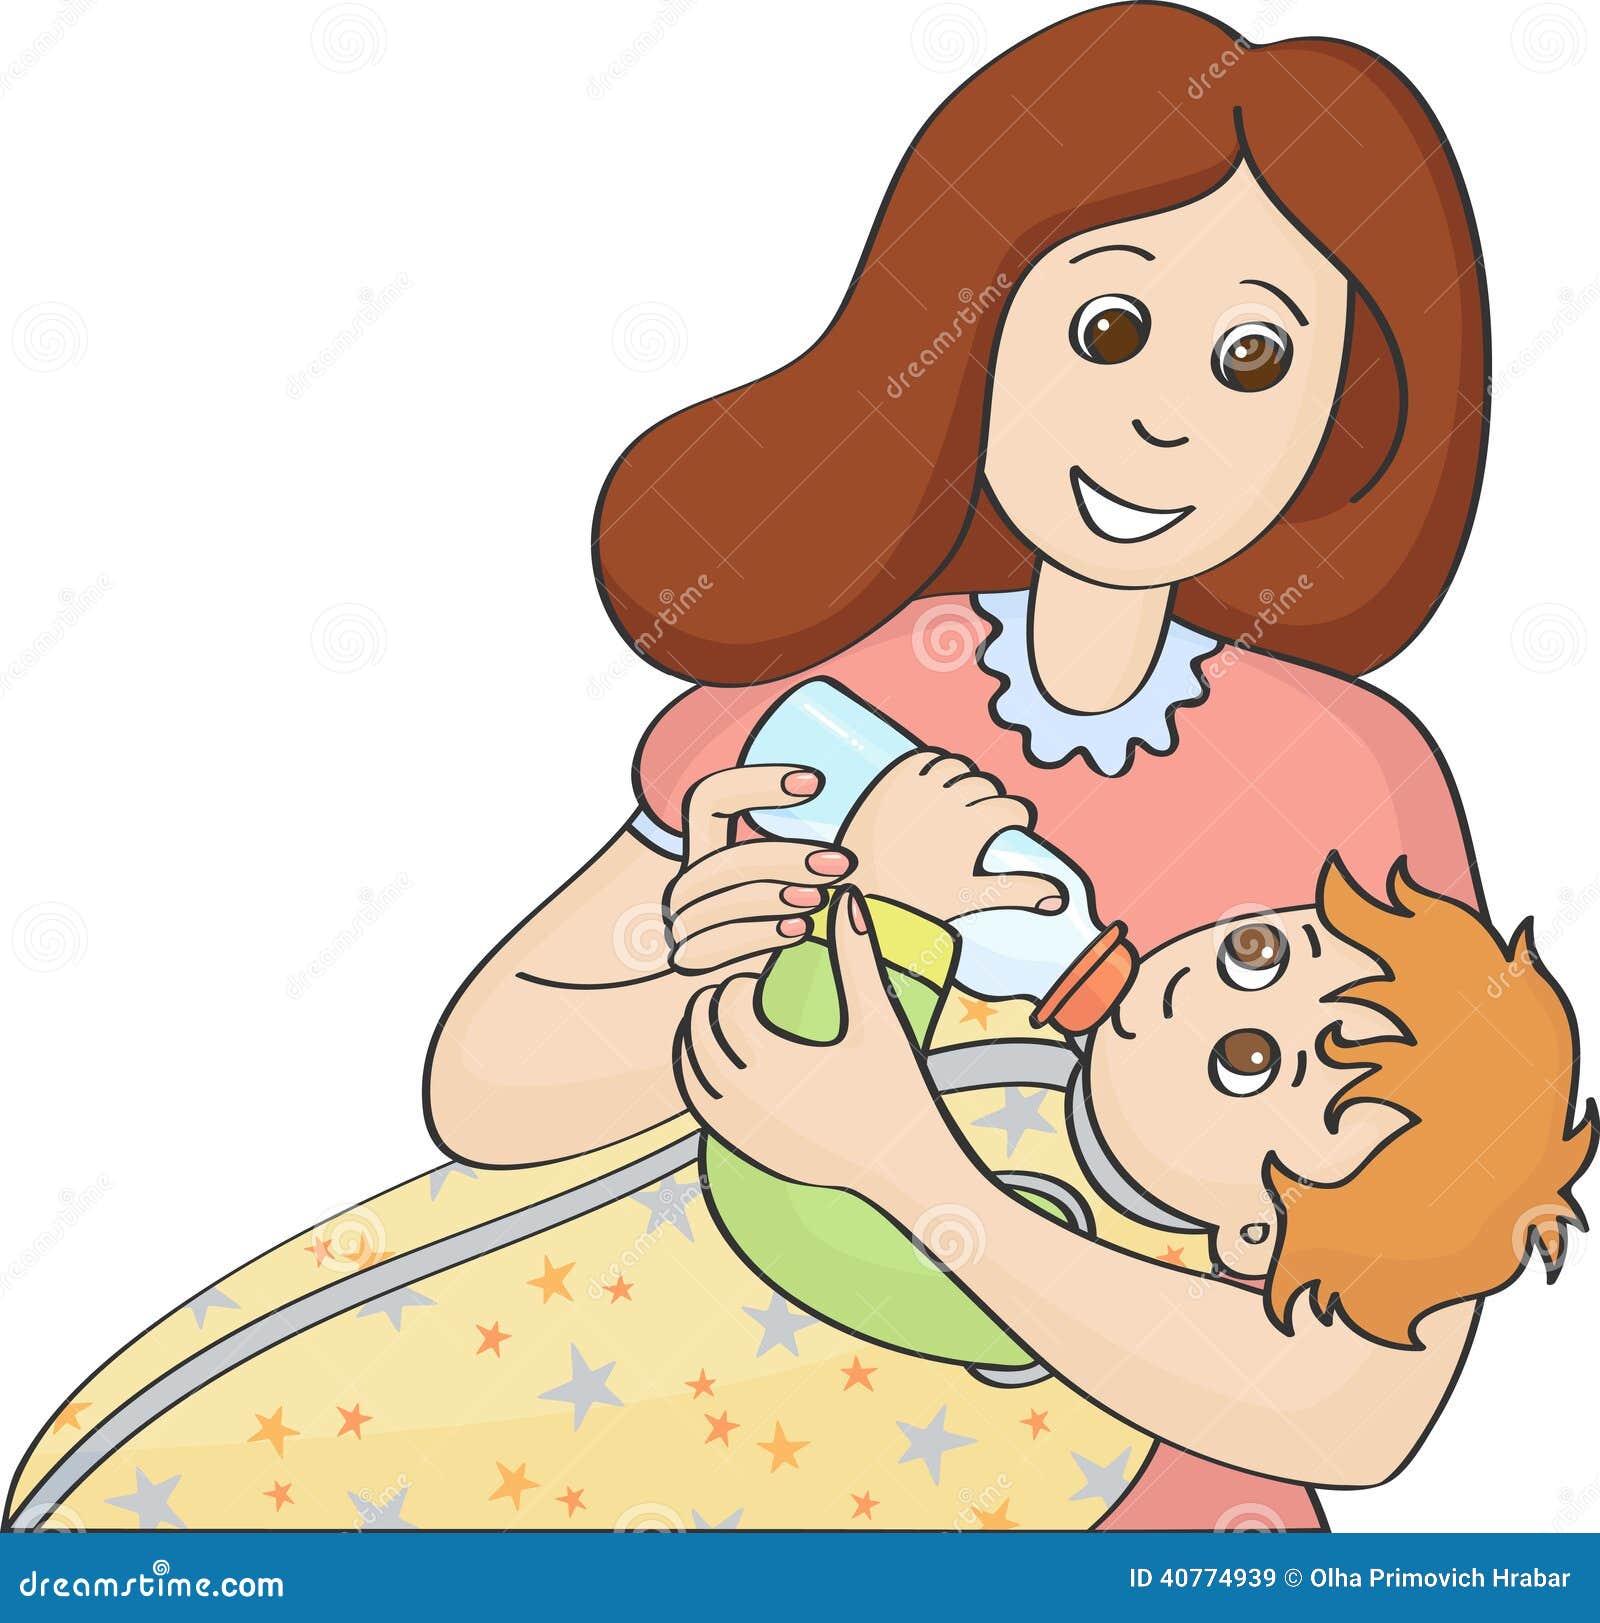 clipart of mother feeding baby - photo #7